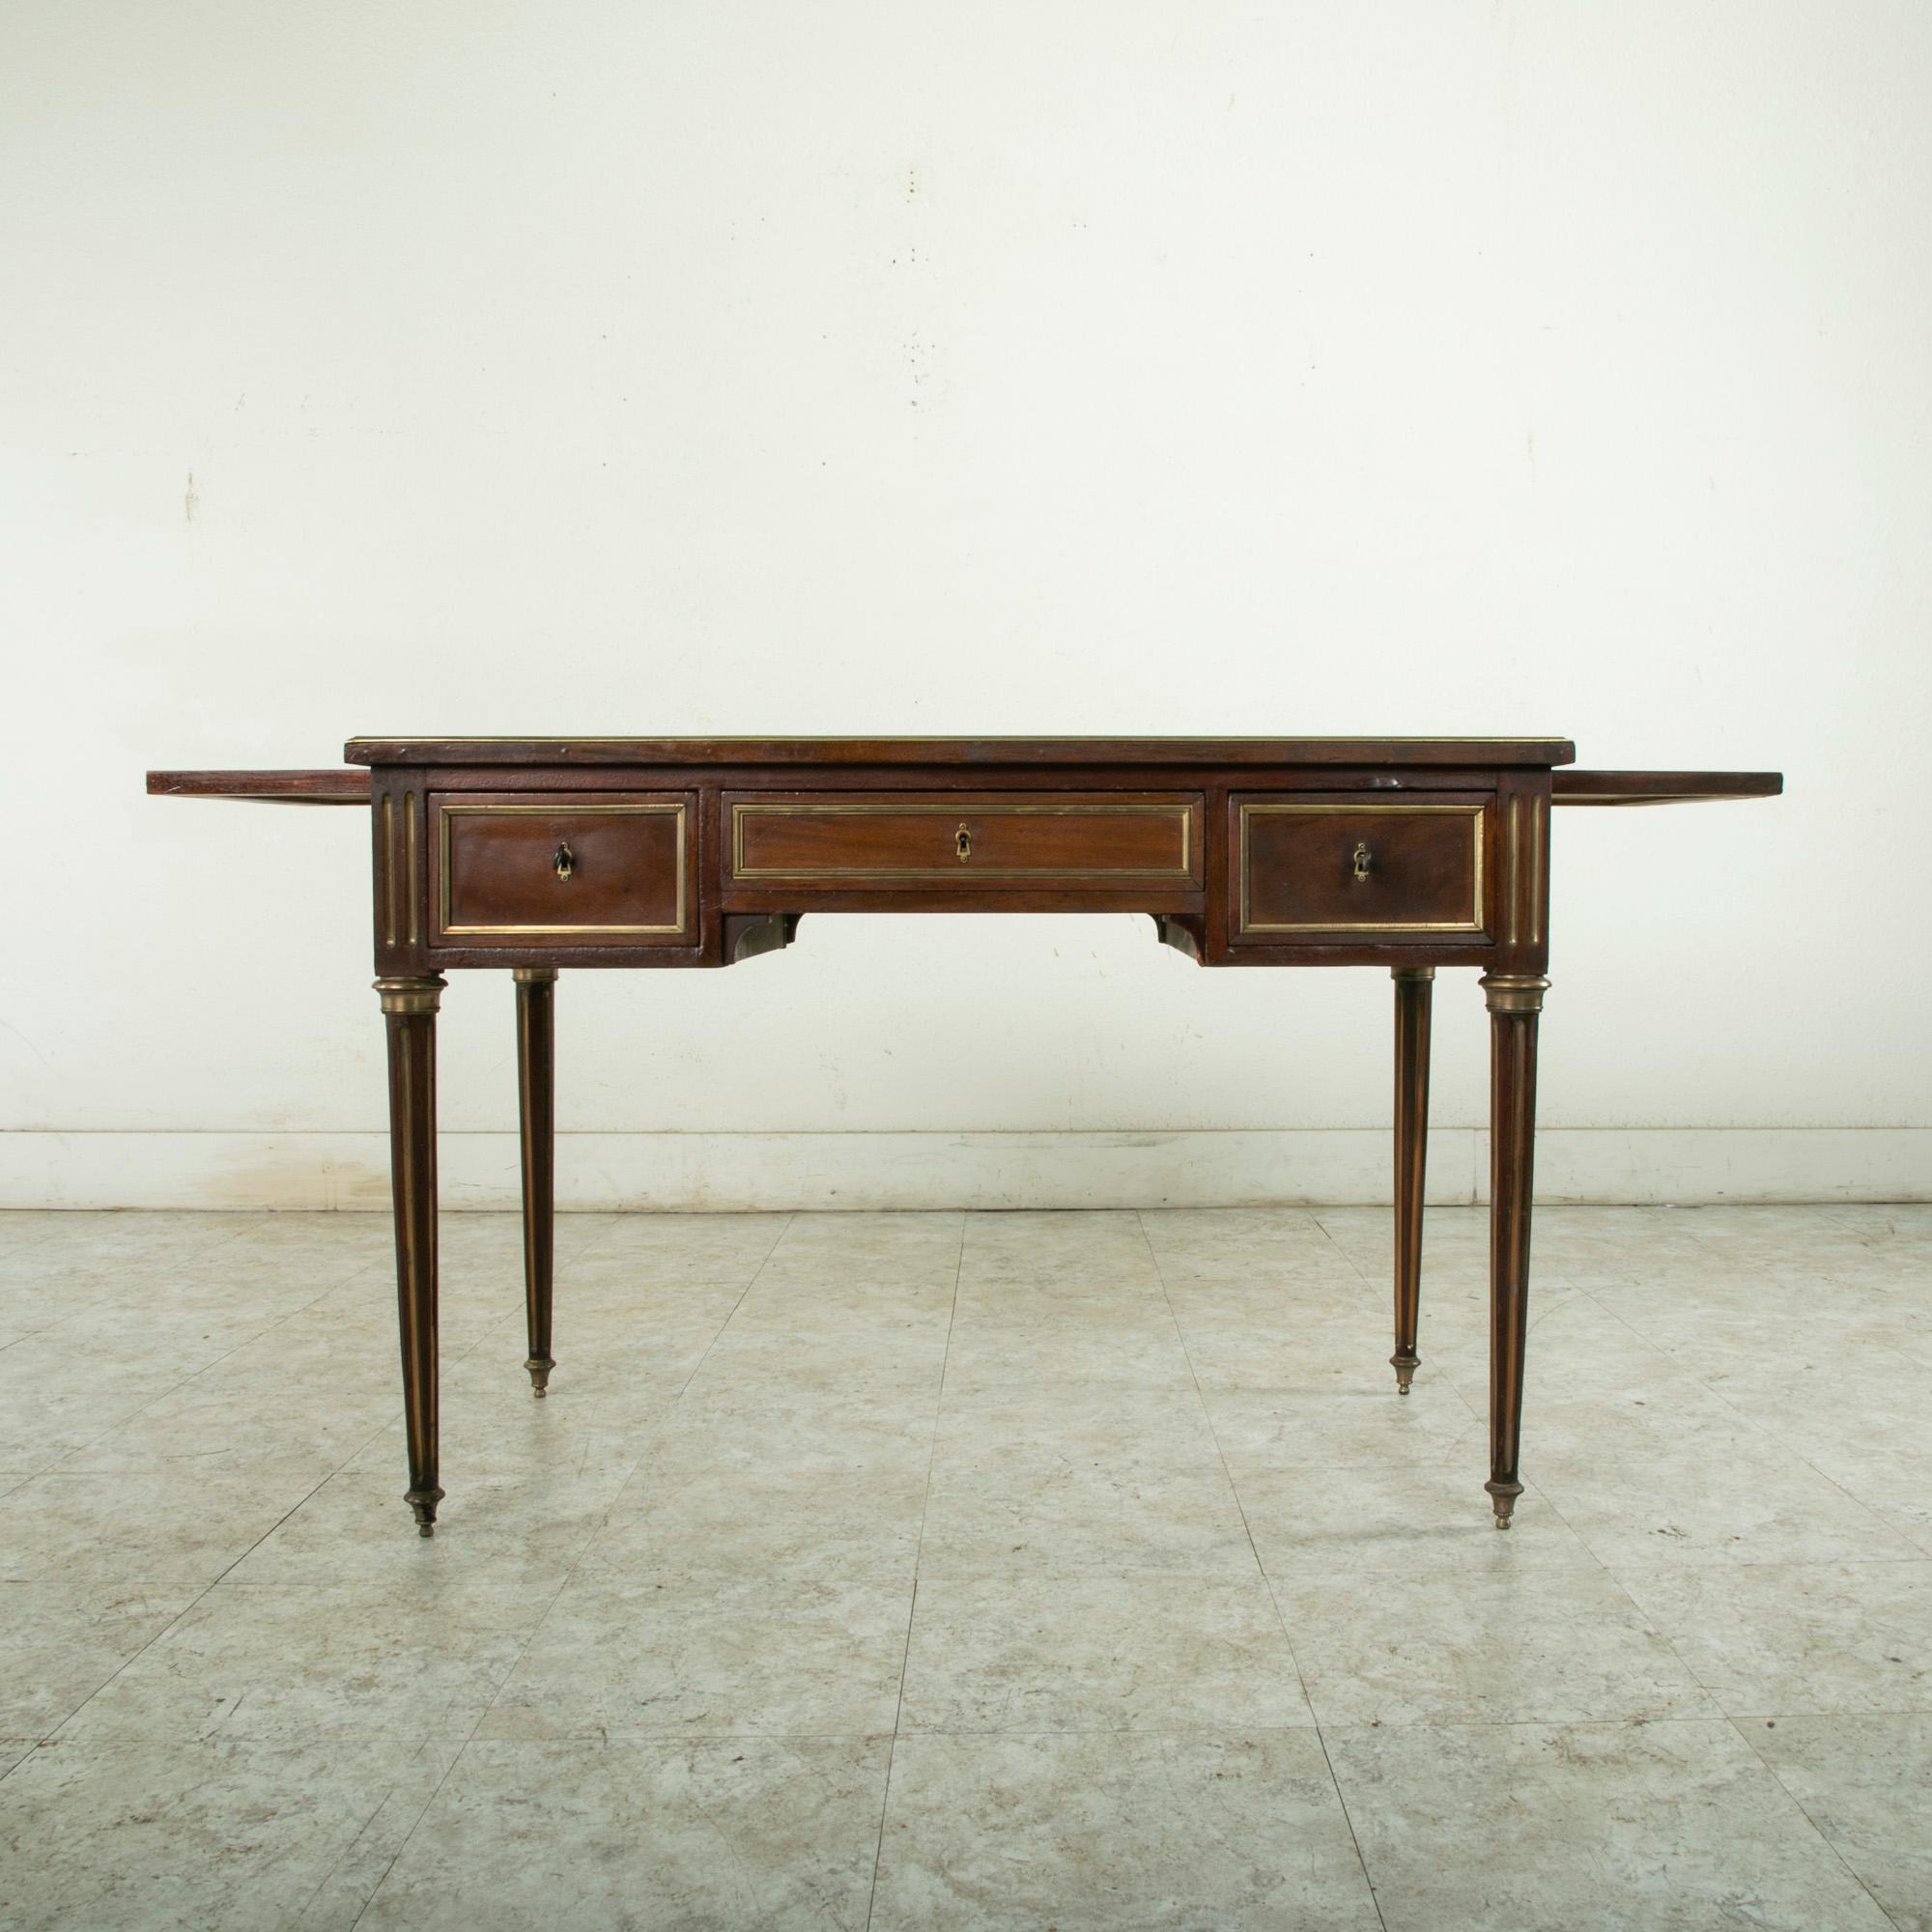 Late 19th Century French Louis XVI Style Mahogany Desk with Bronze Detailing For Sale 5